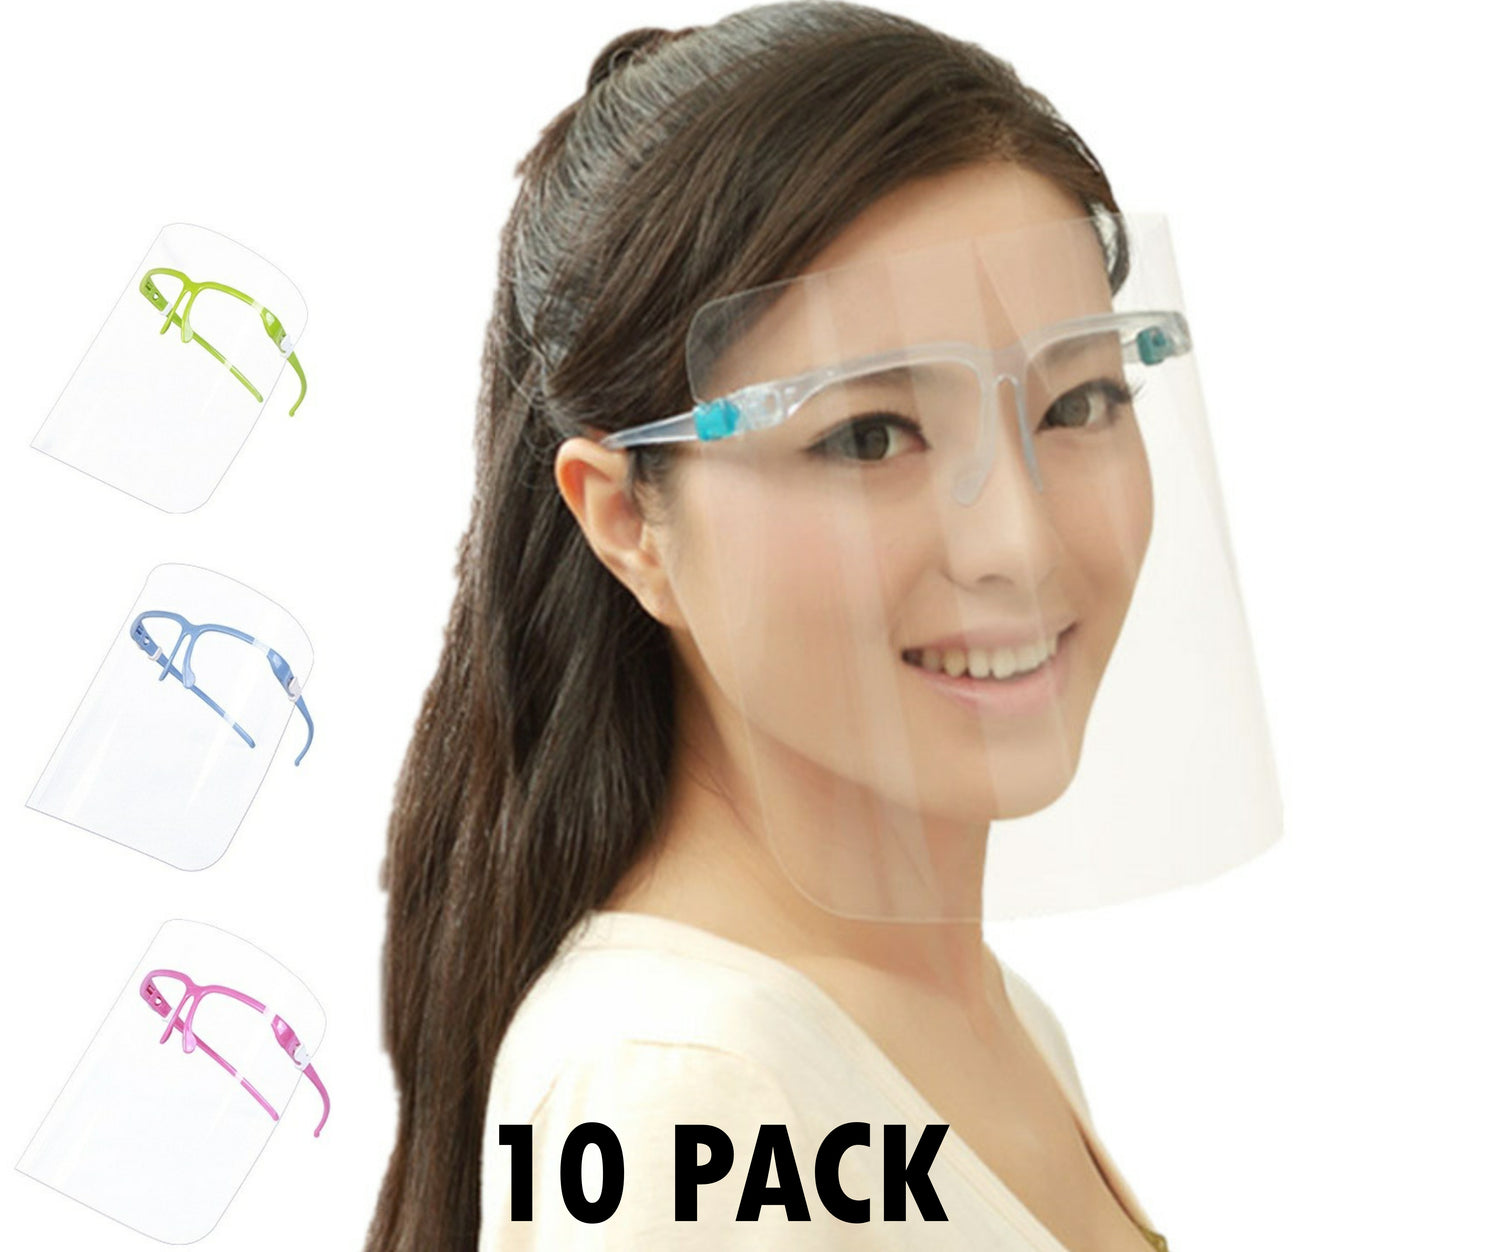 Face Shield Guard Mask Safety Protection With Glasses -10 Pack - USA Medical Supply